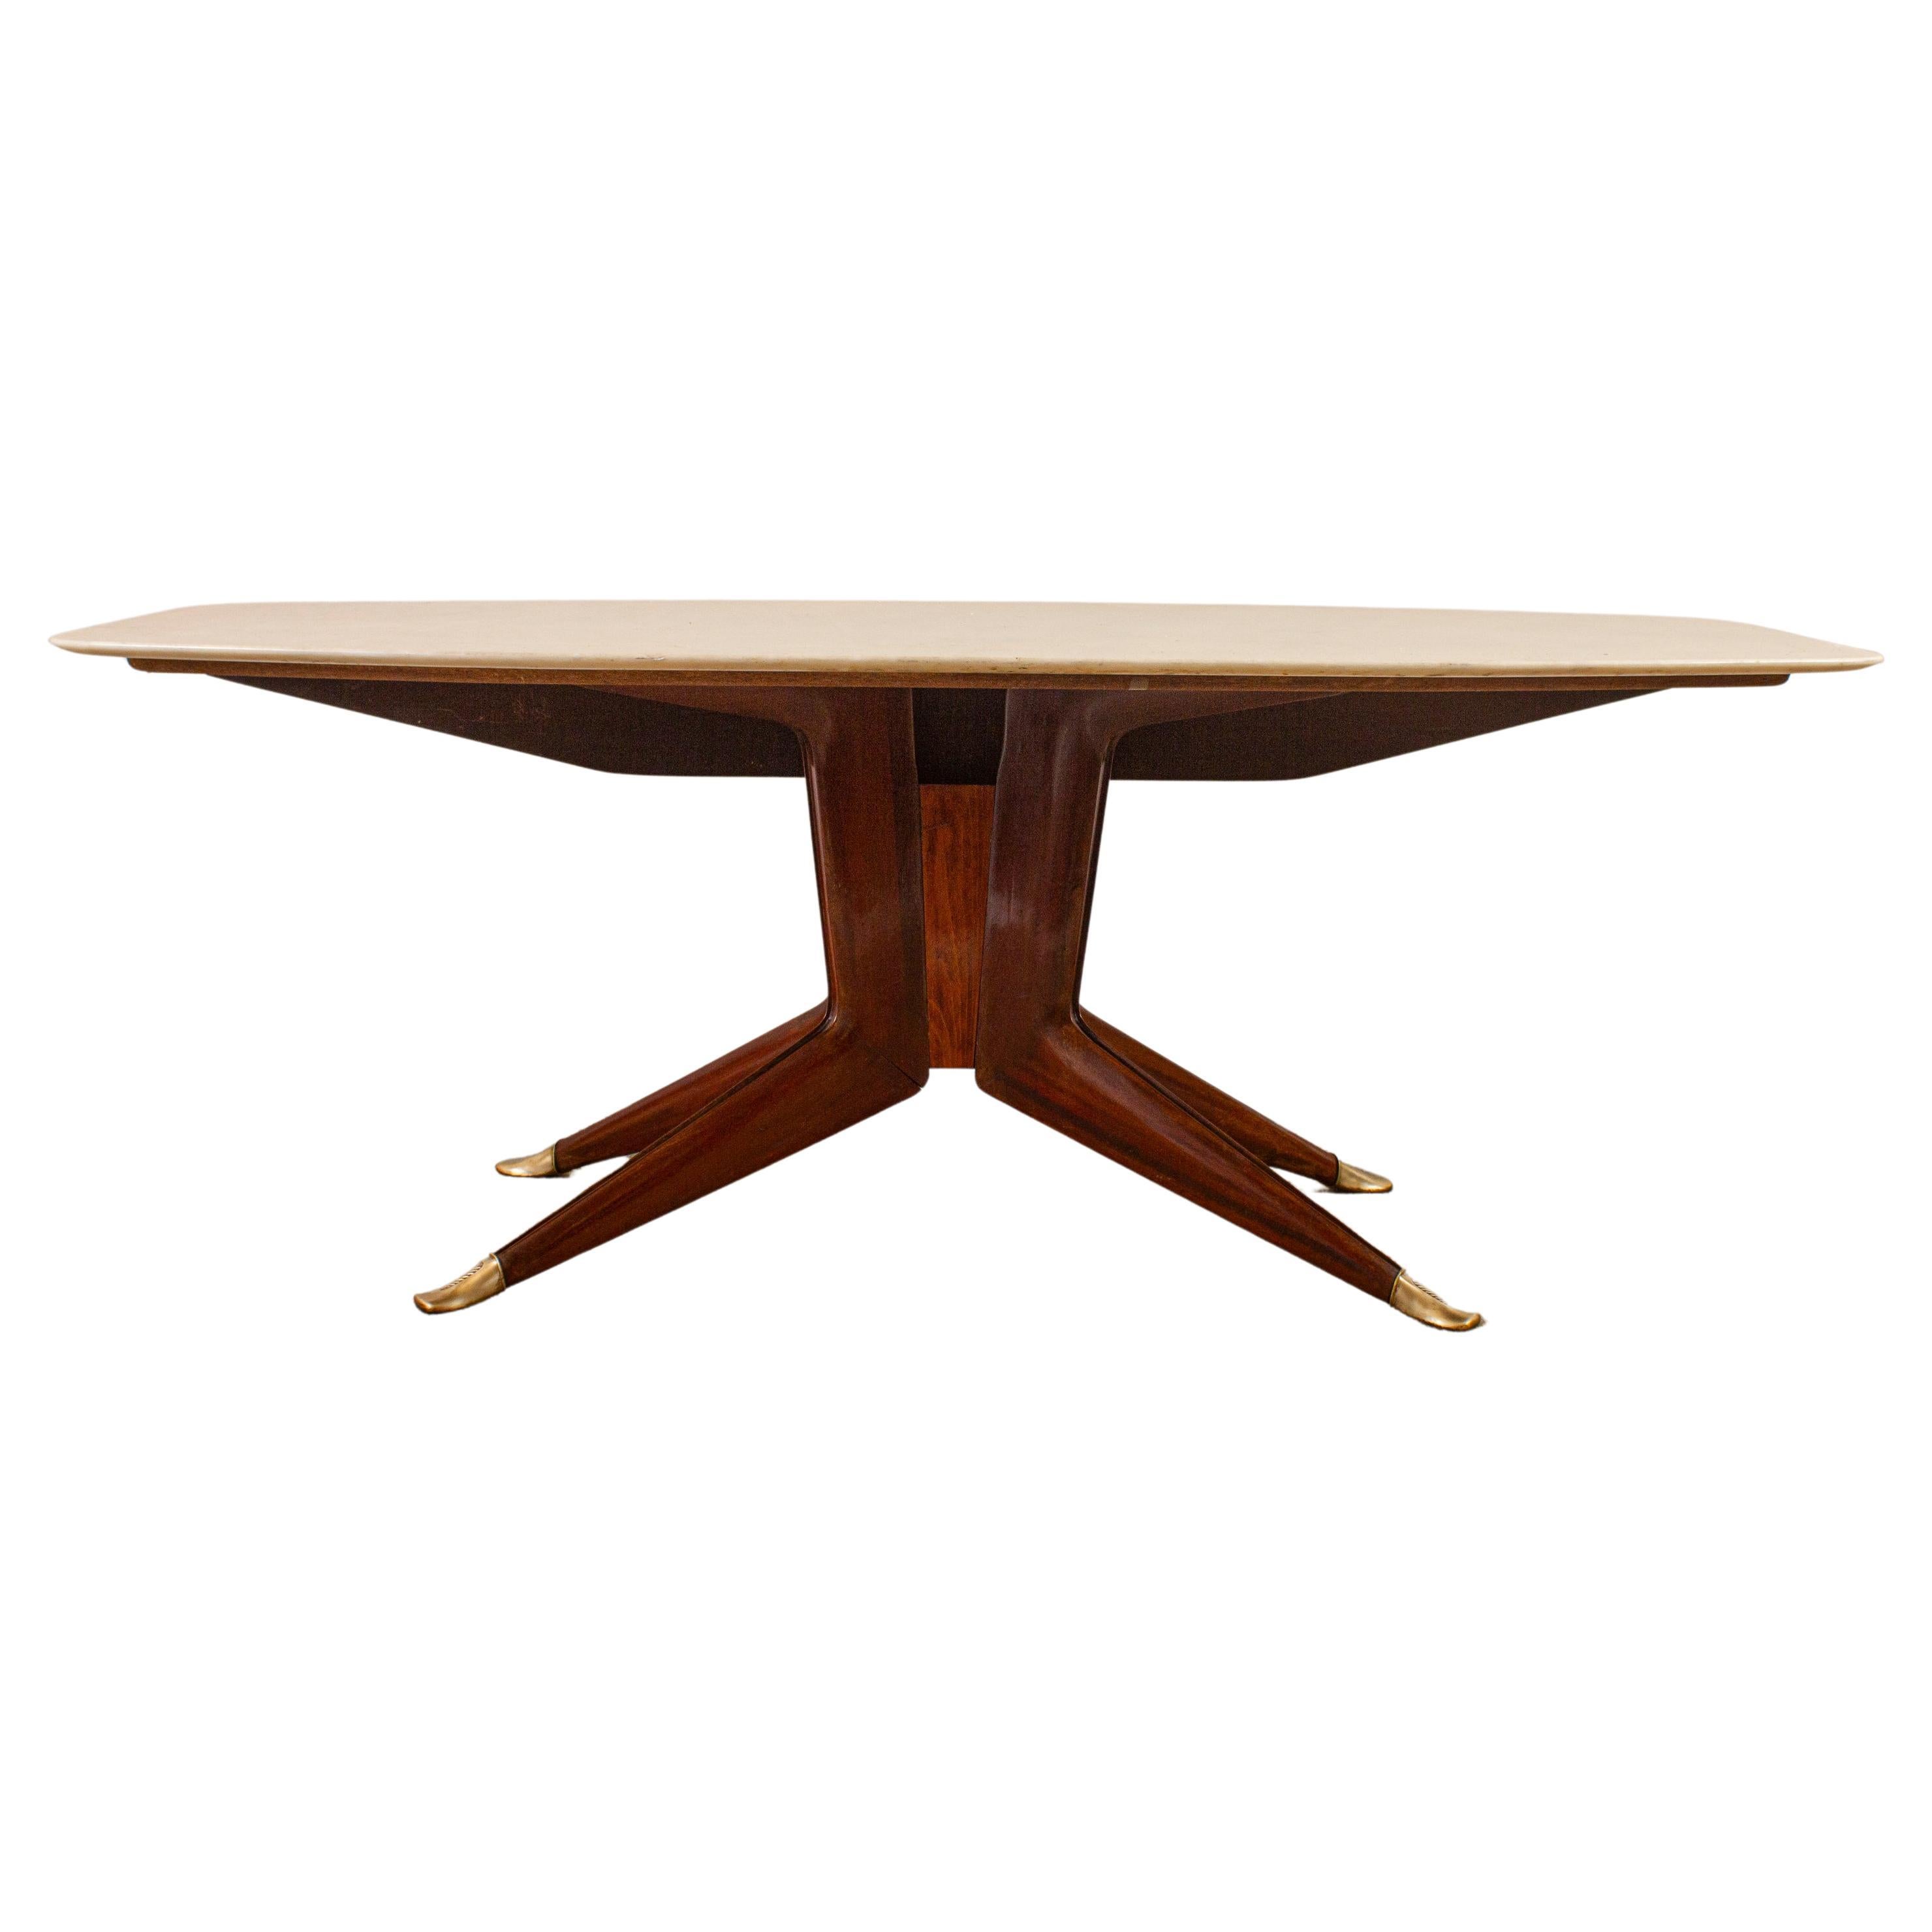 Striking  Mid-Century table with octagonal shape  white Carrara marble top.
Features an elegant  sculpted modular support structure made by walnut .
 From the central join  the legs extend downwards toward the floor , finished with bronze tips.
This